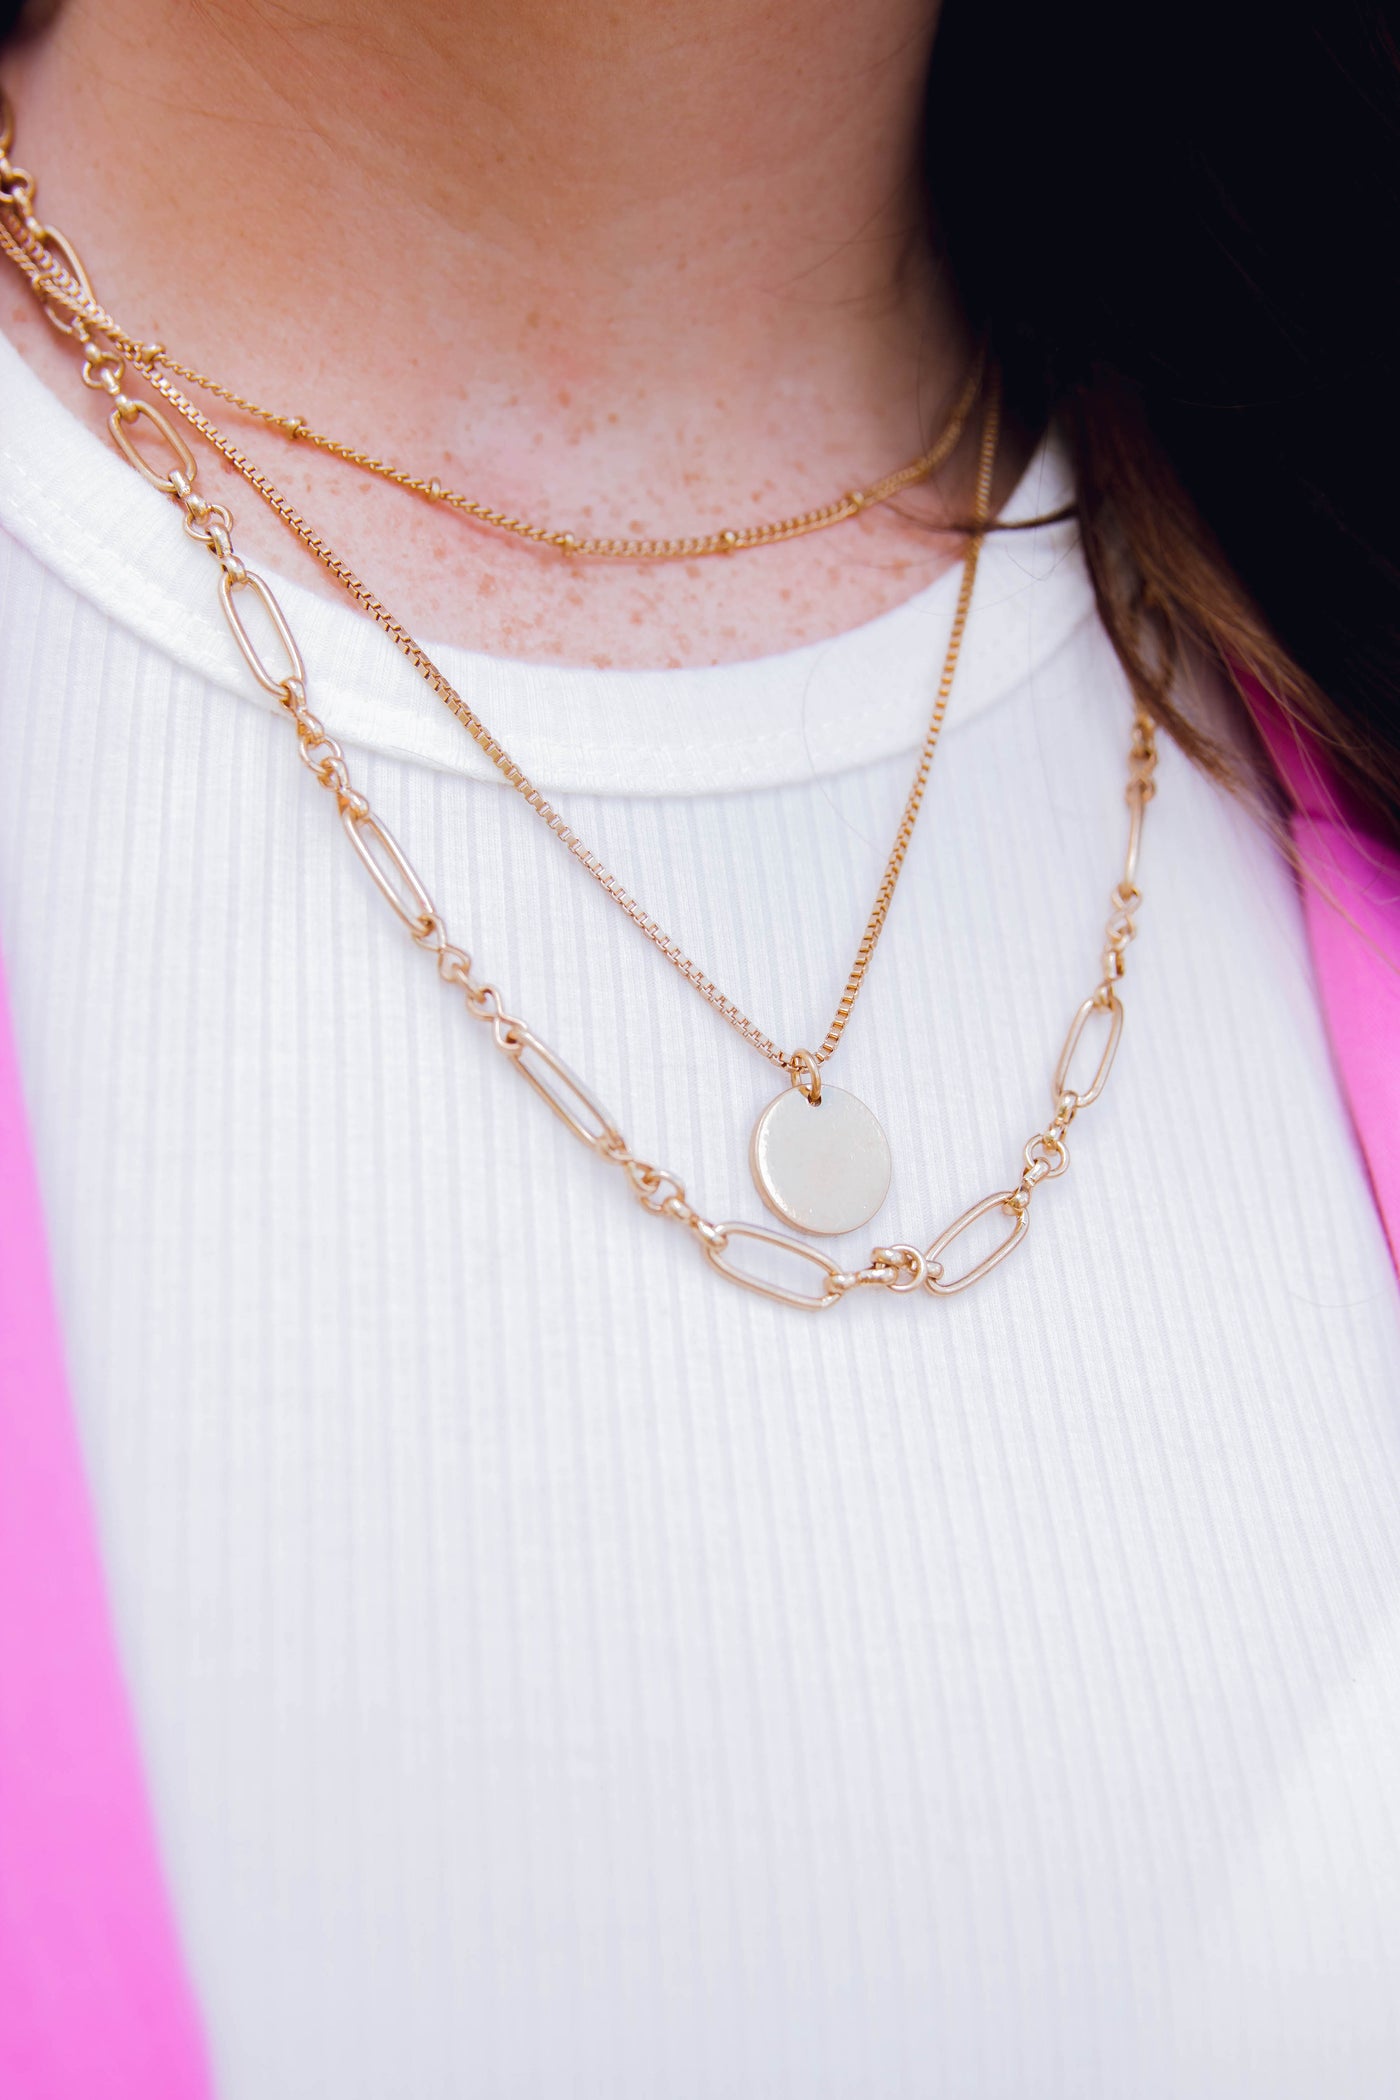 Canvas Layered Necklace- Layered Charm Necklace- Worn Gold Chain Necklace